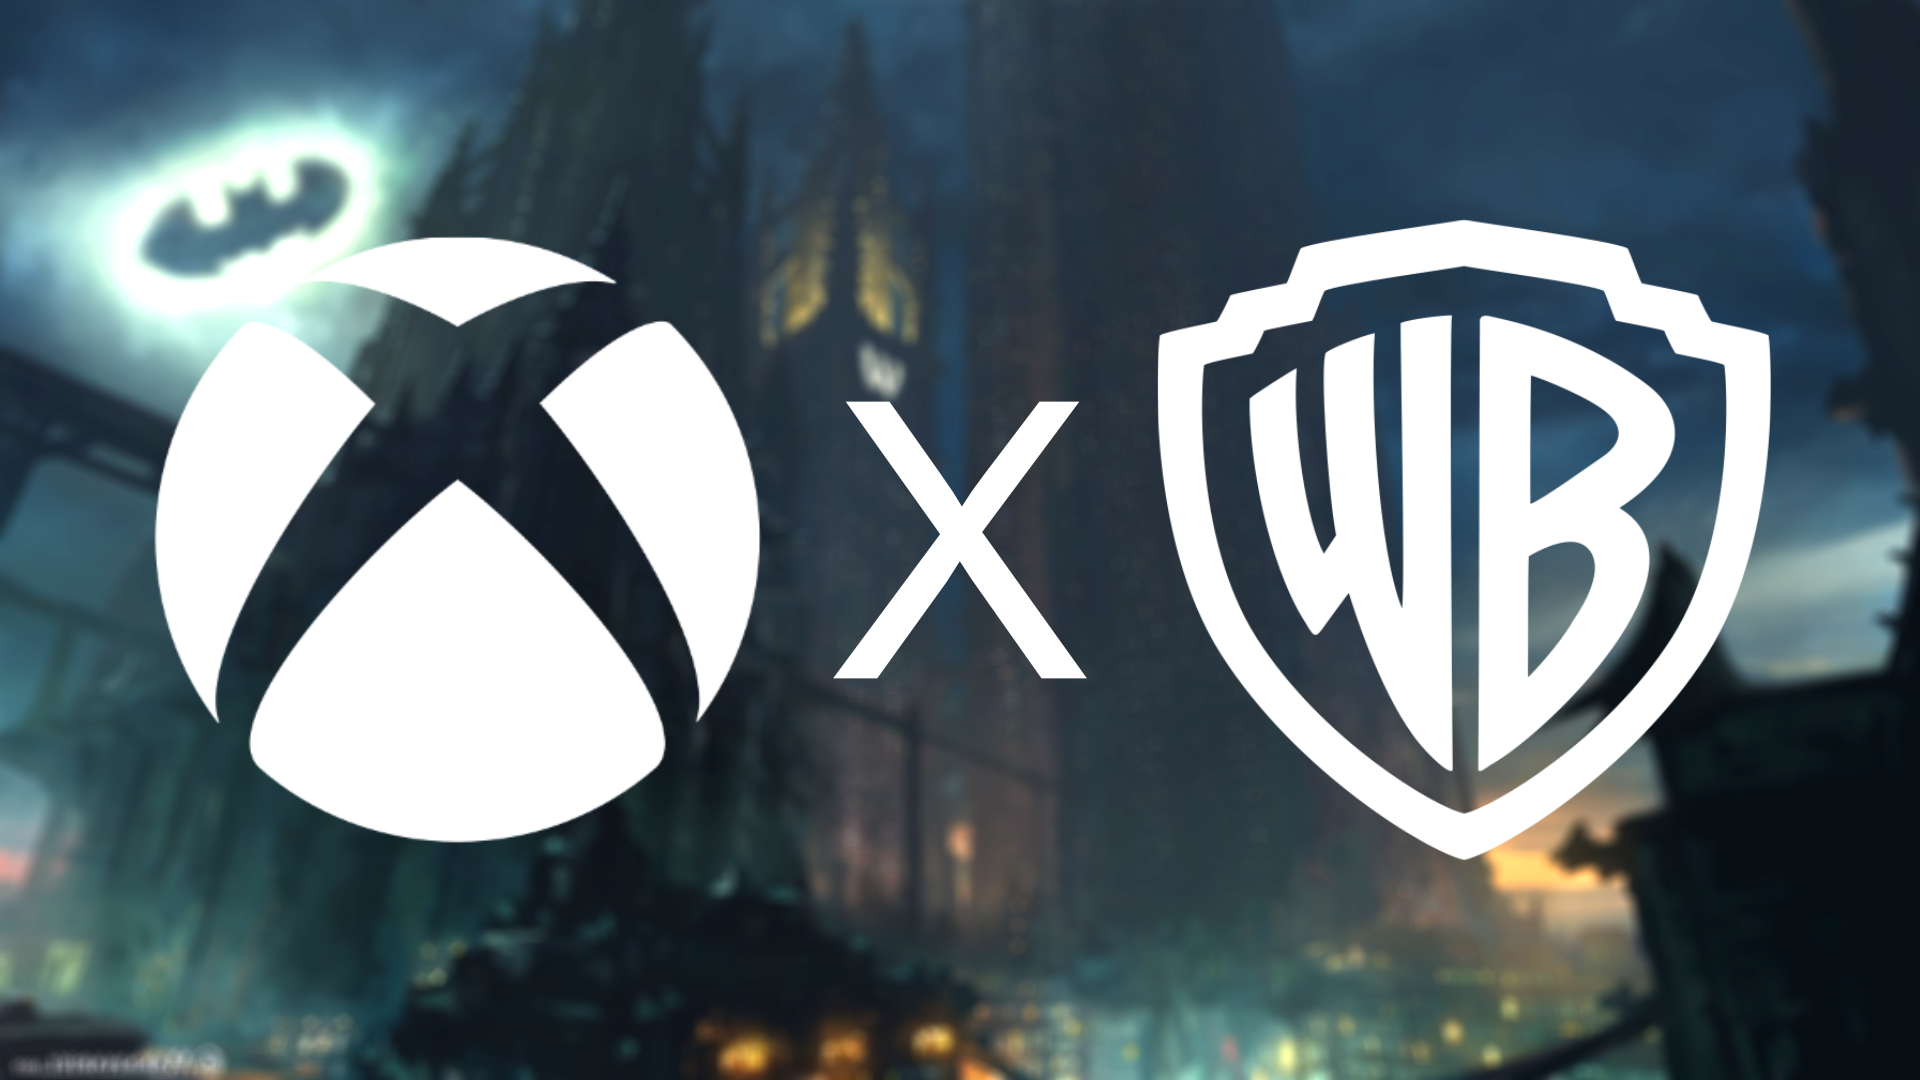 Microsoft also reportedly interested in purchasing Warner Bros. gaming  division and NetherRealm Studios